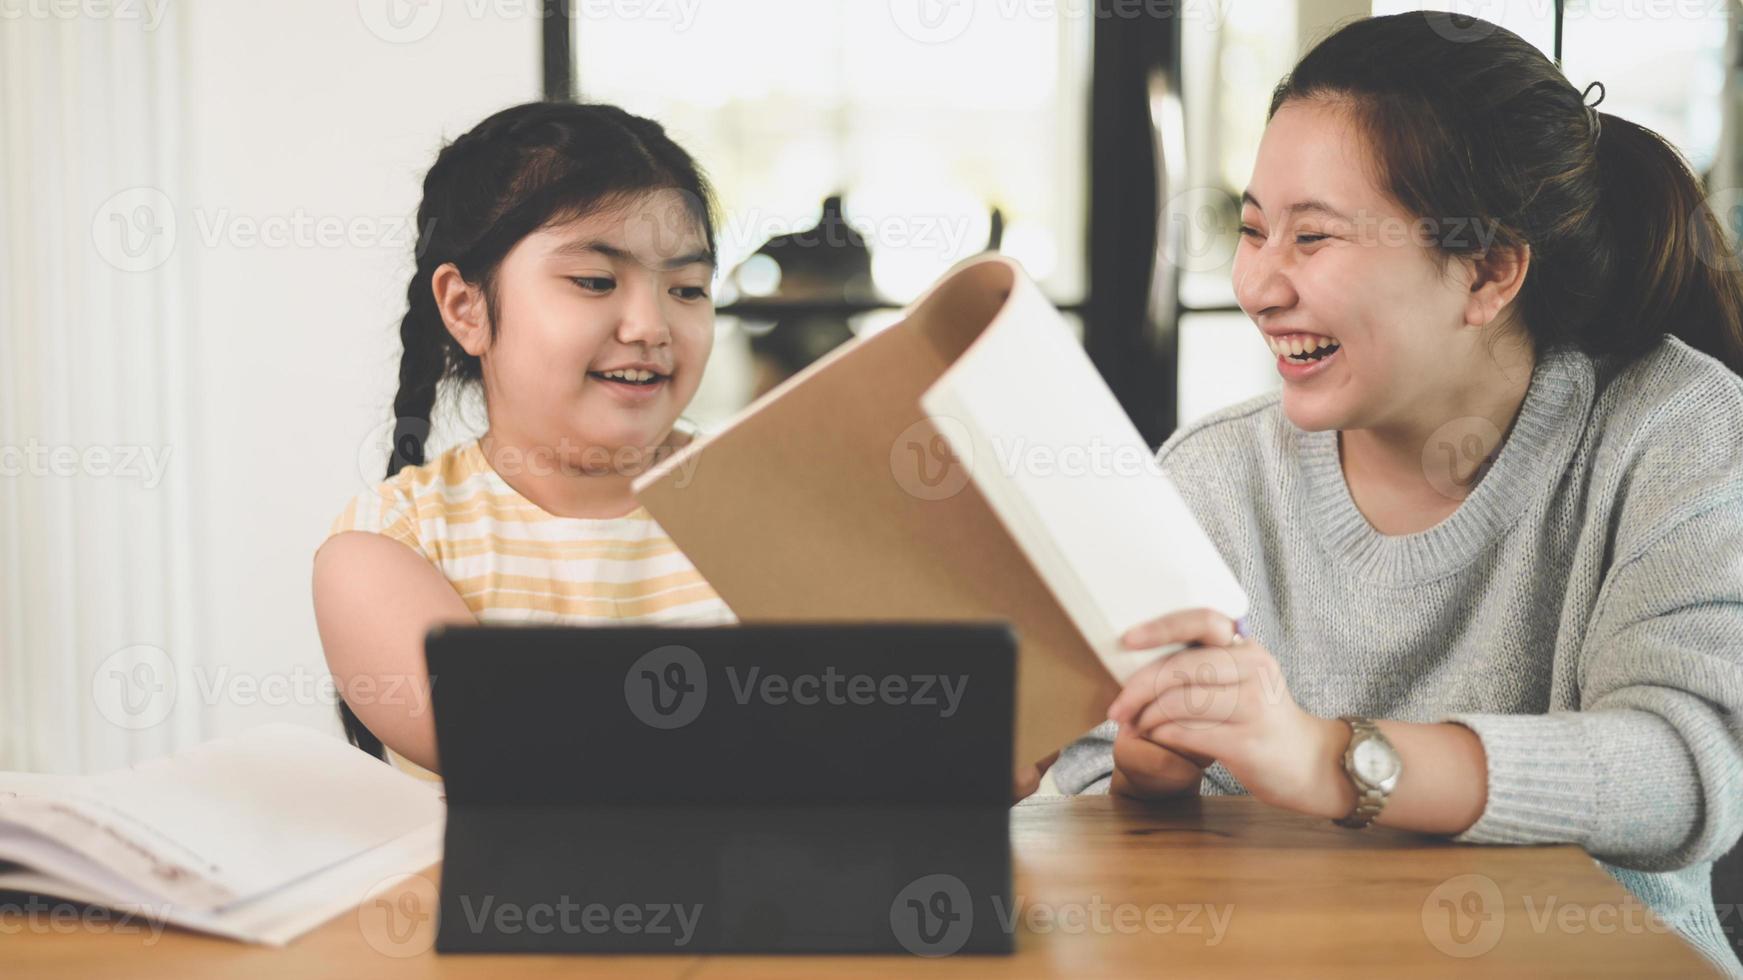 The sisters taught the sisters to do their homework at home. photo